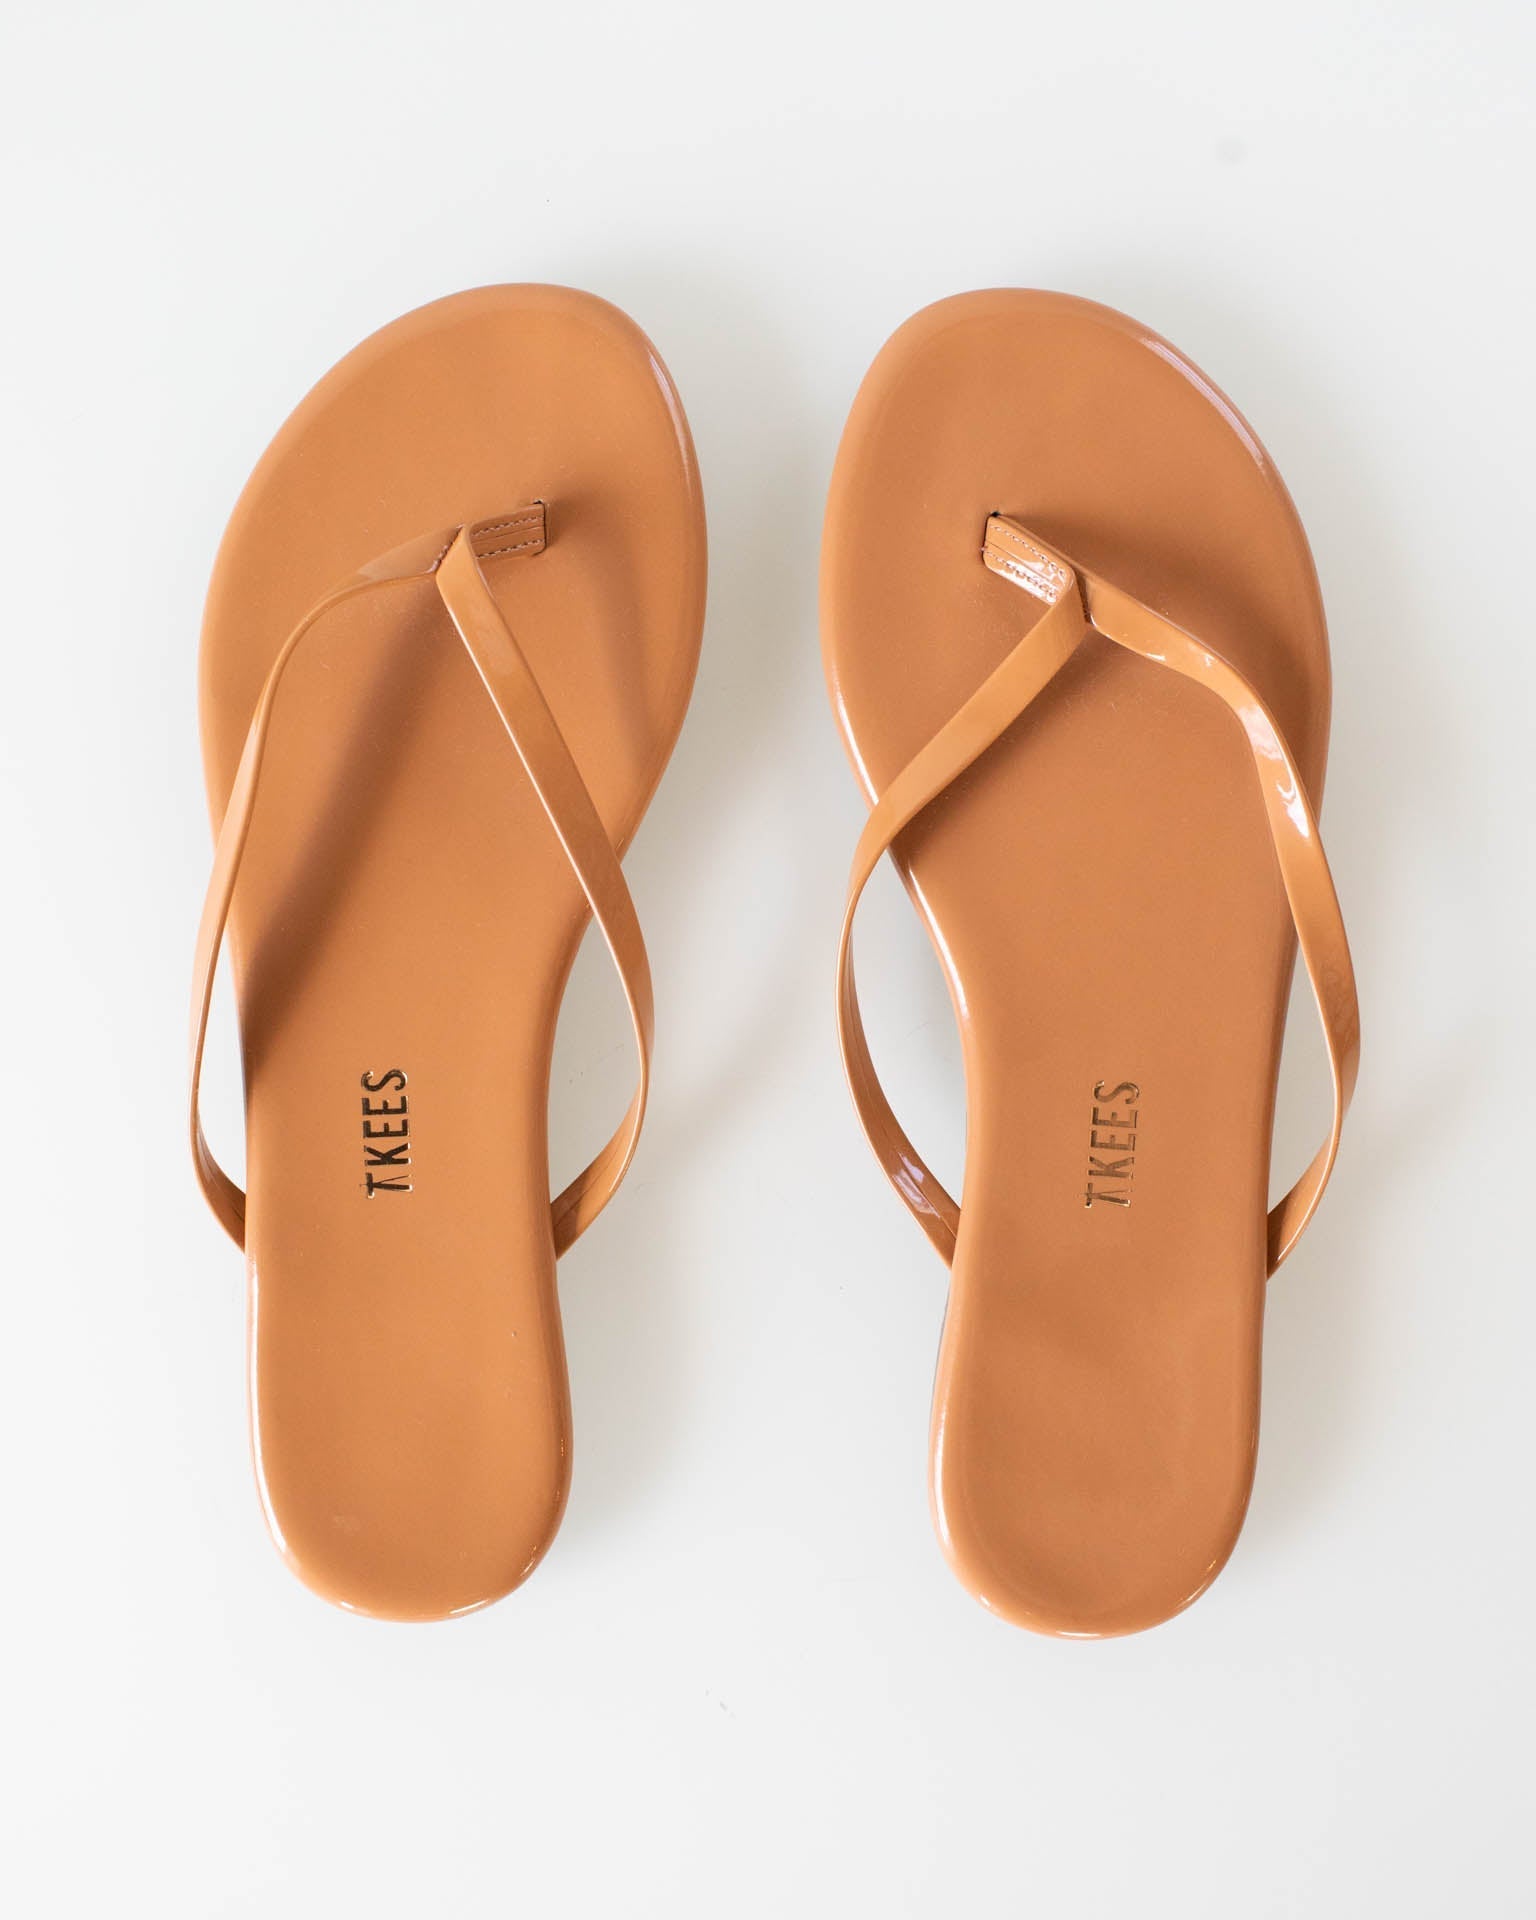 Tkees Glosses Flip Flop in Sunbliss - Bliss Boutiques